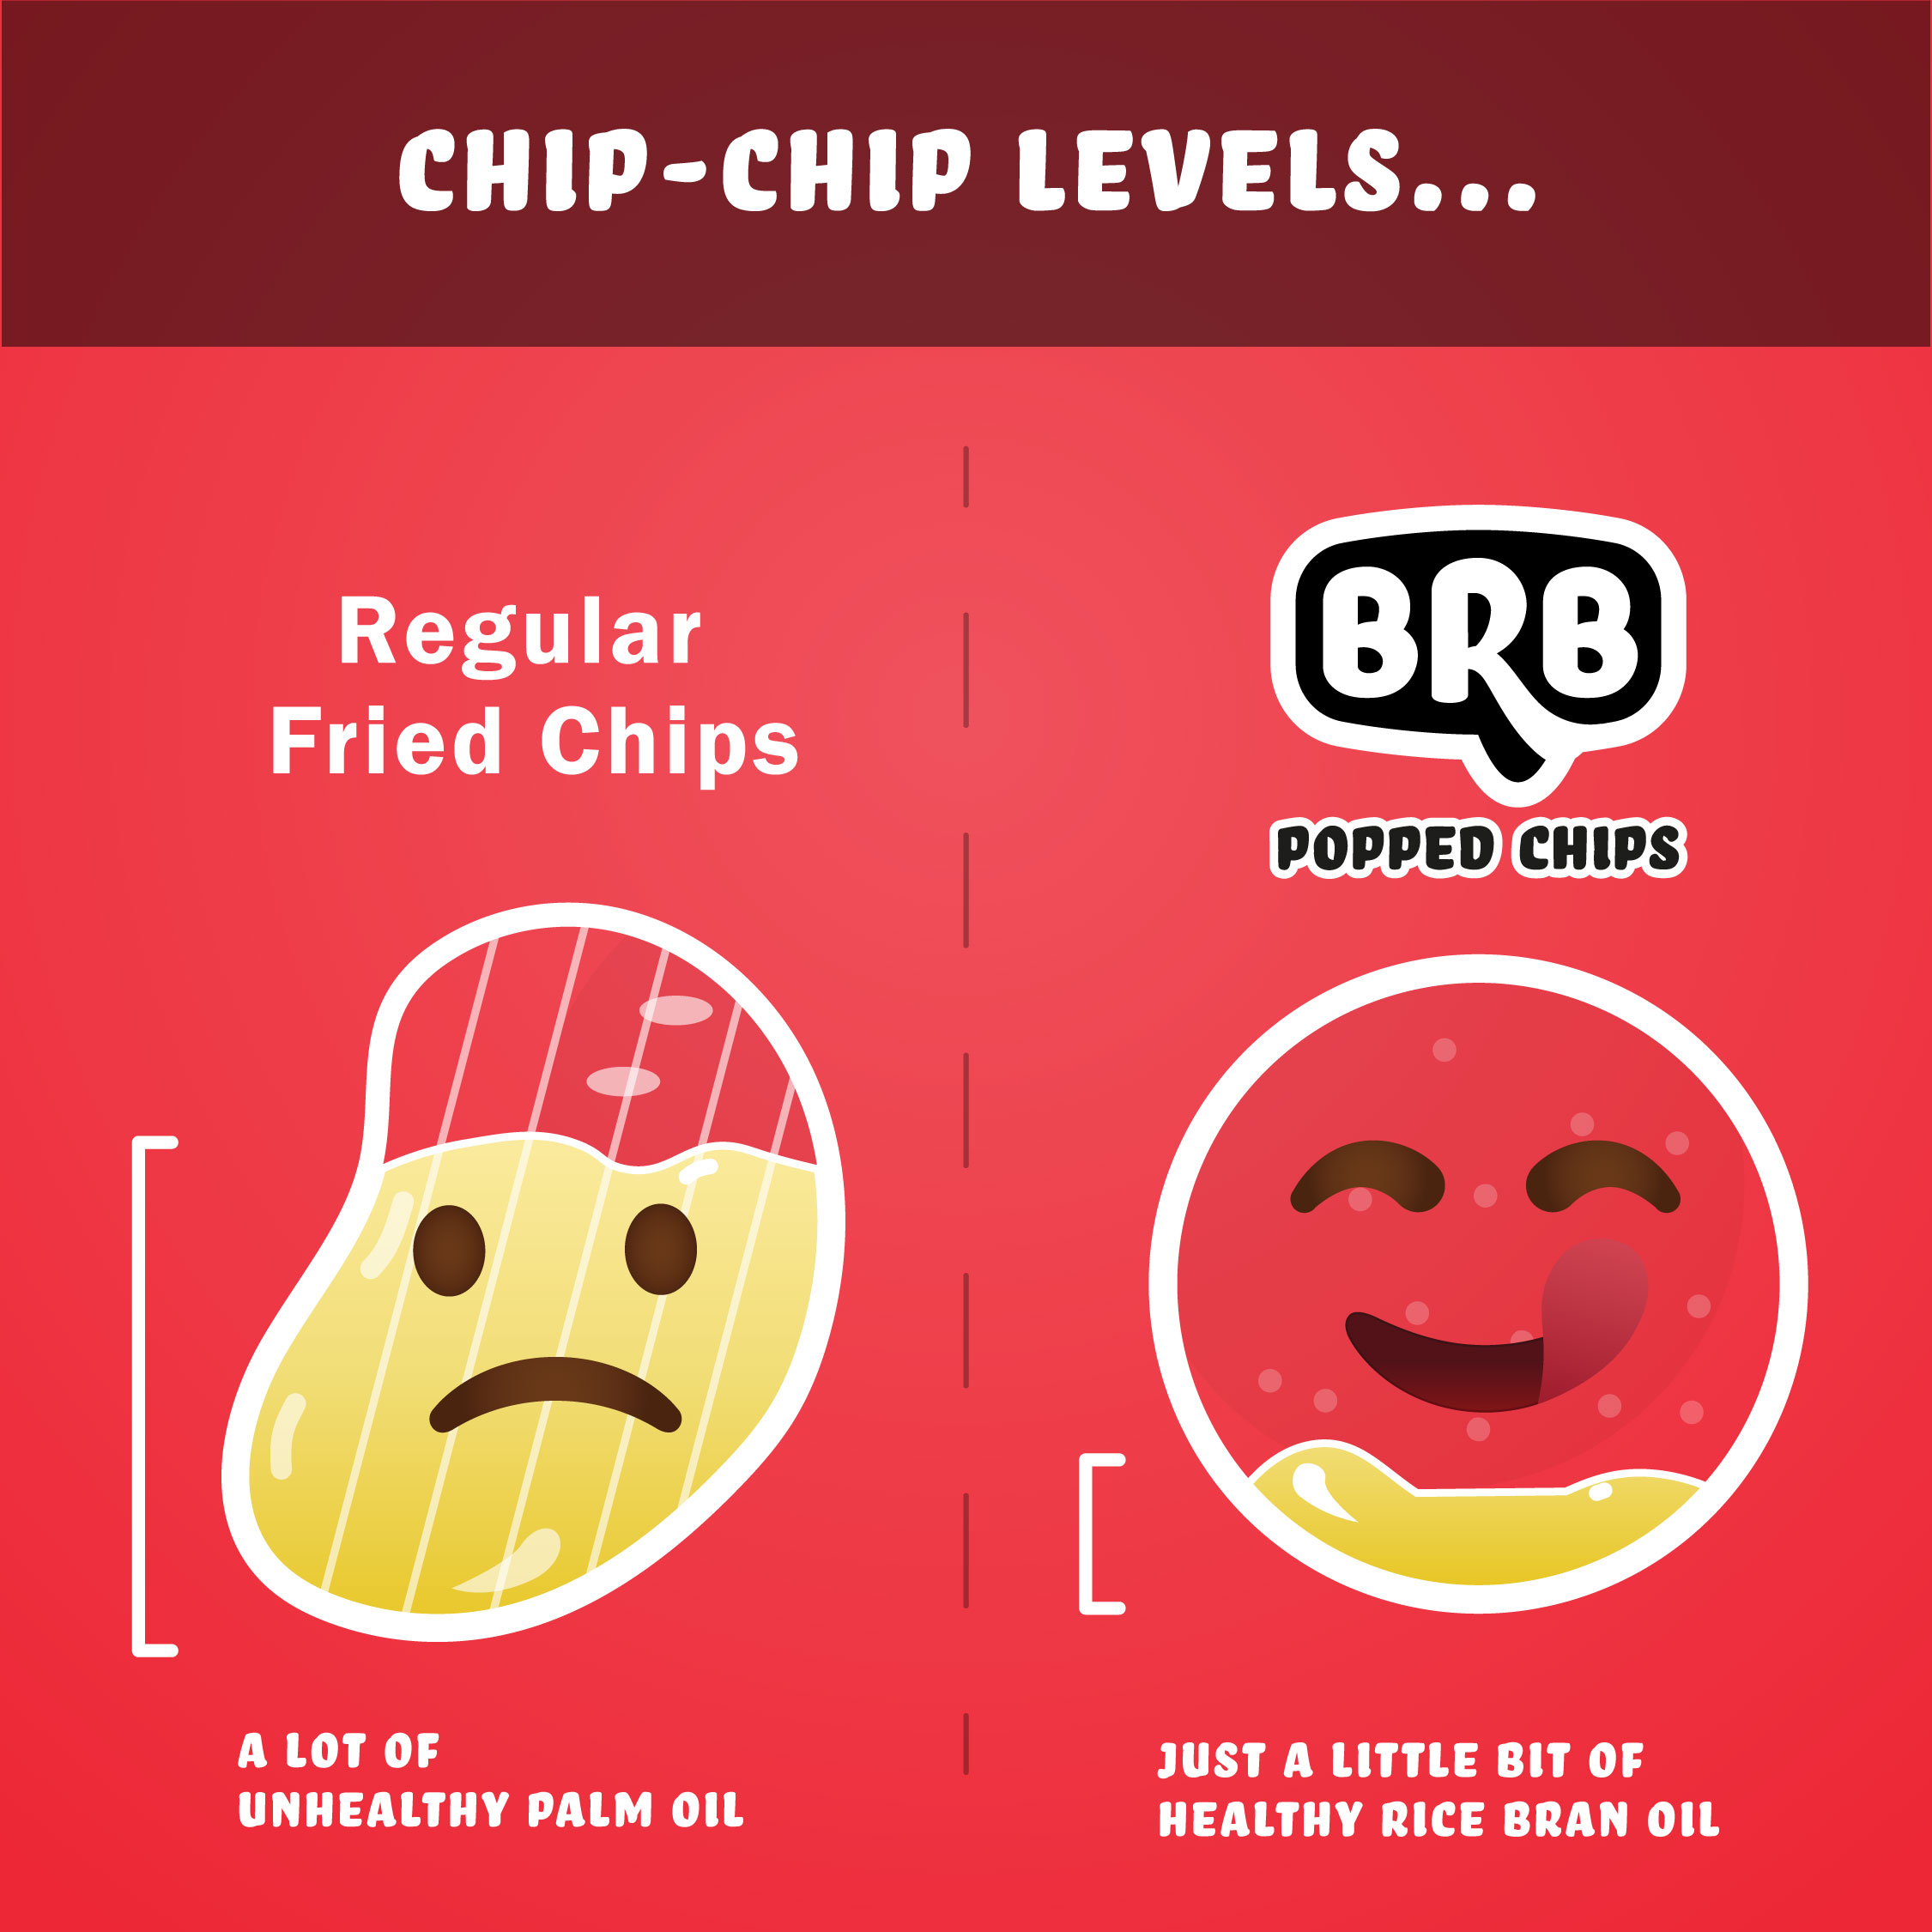 Also adding 👉 When I text 📱 it means - BRB Popped Chips